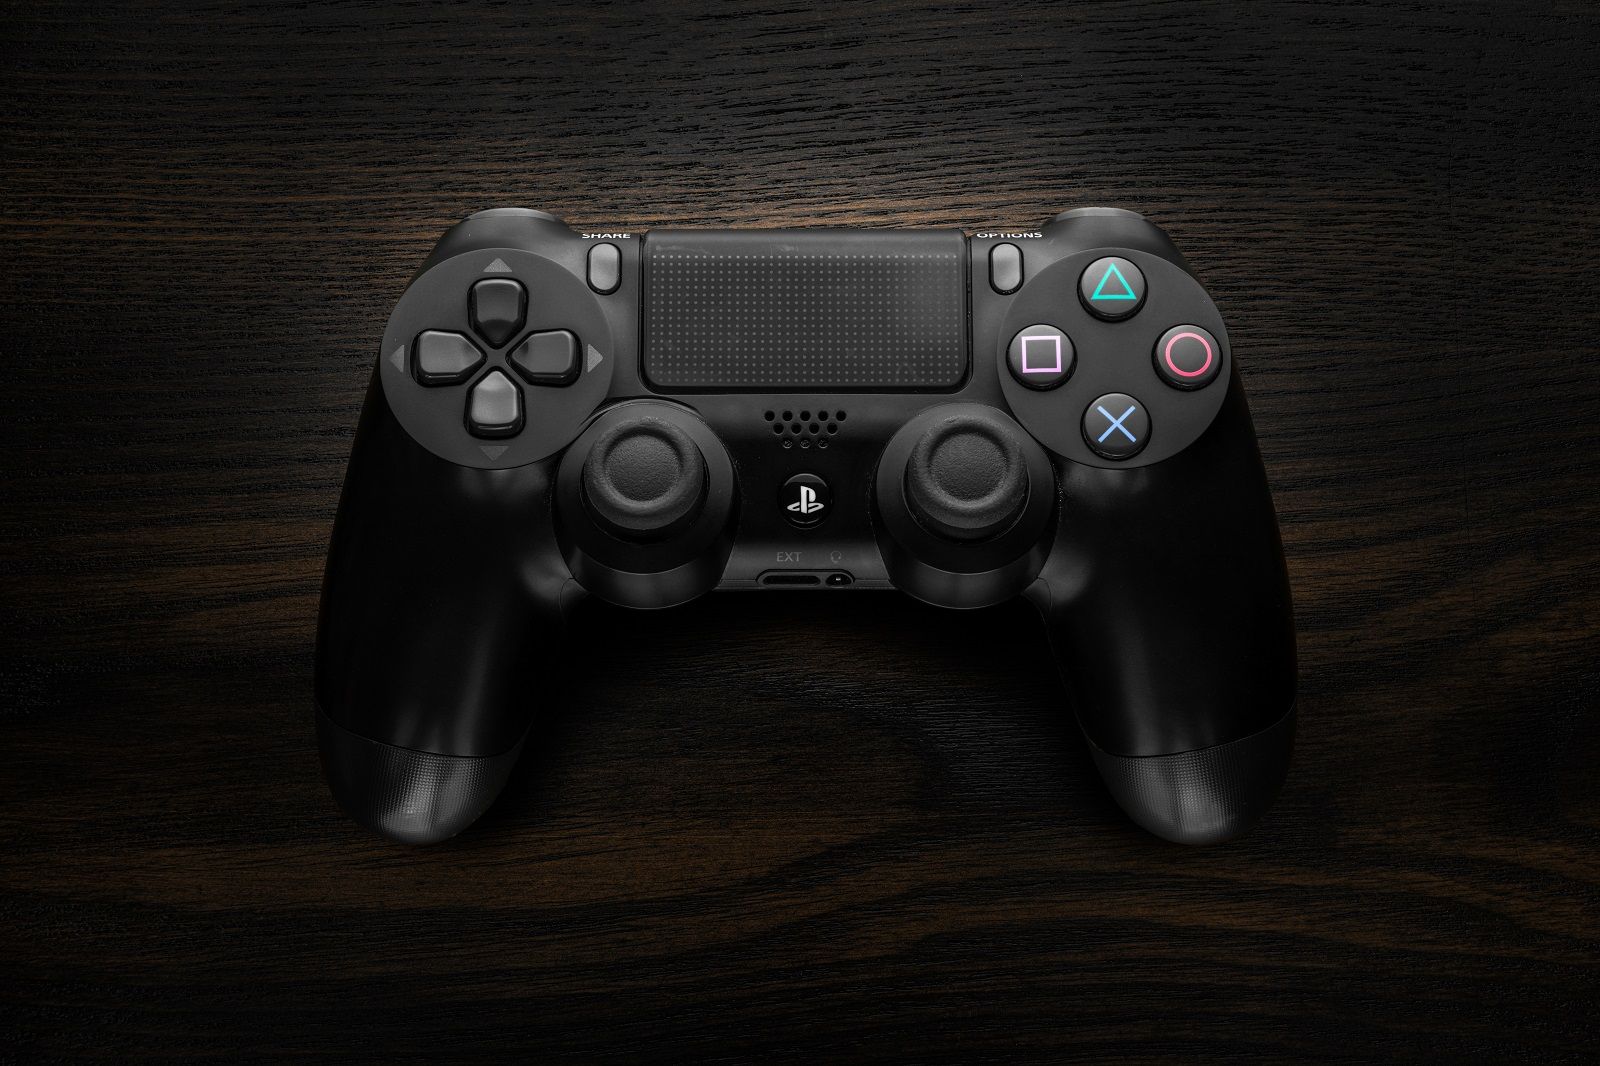 How to use a PS5 DualSense controller on PC